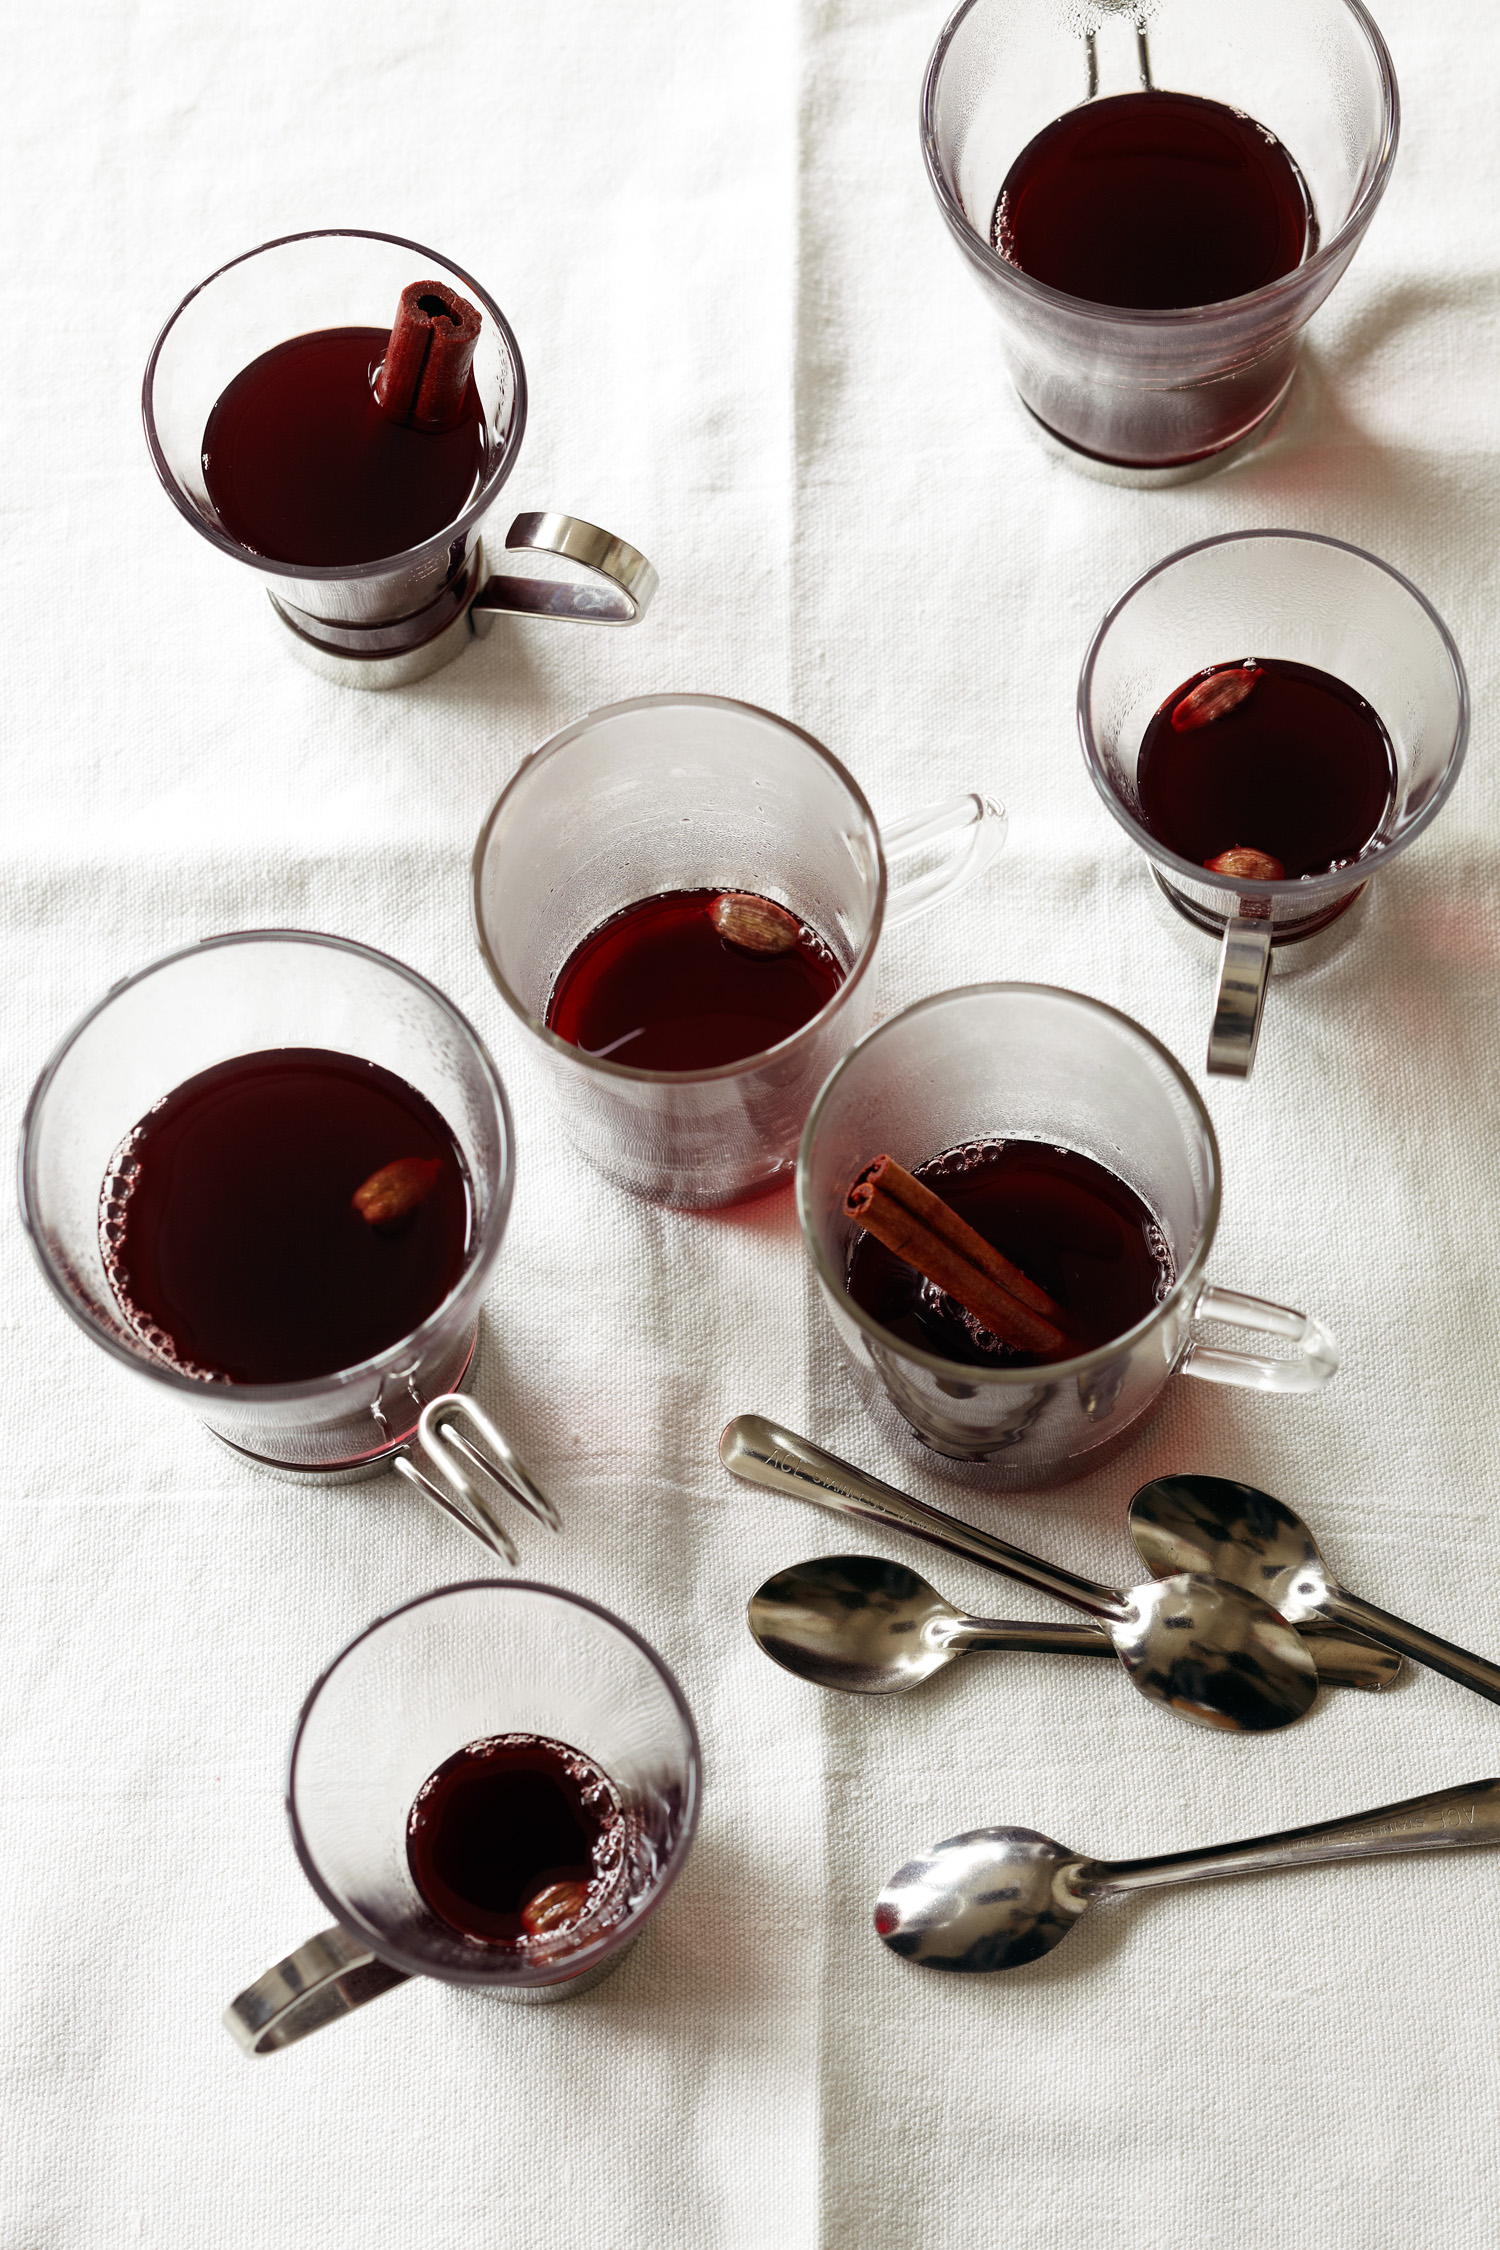 Mulled Wine Punch